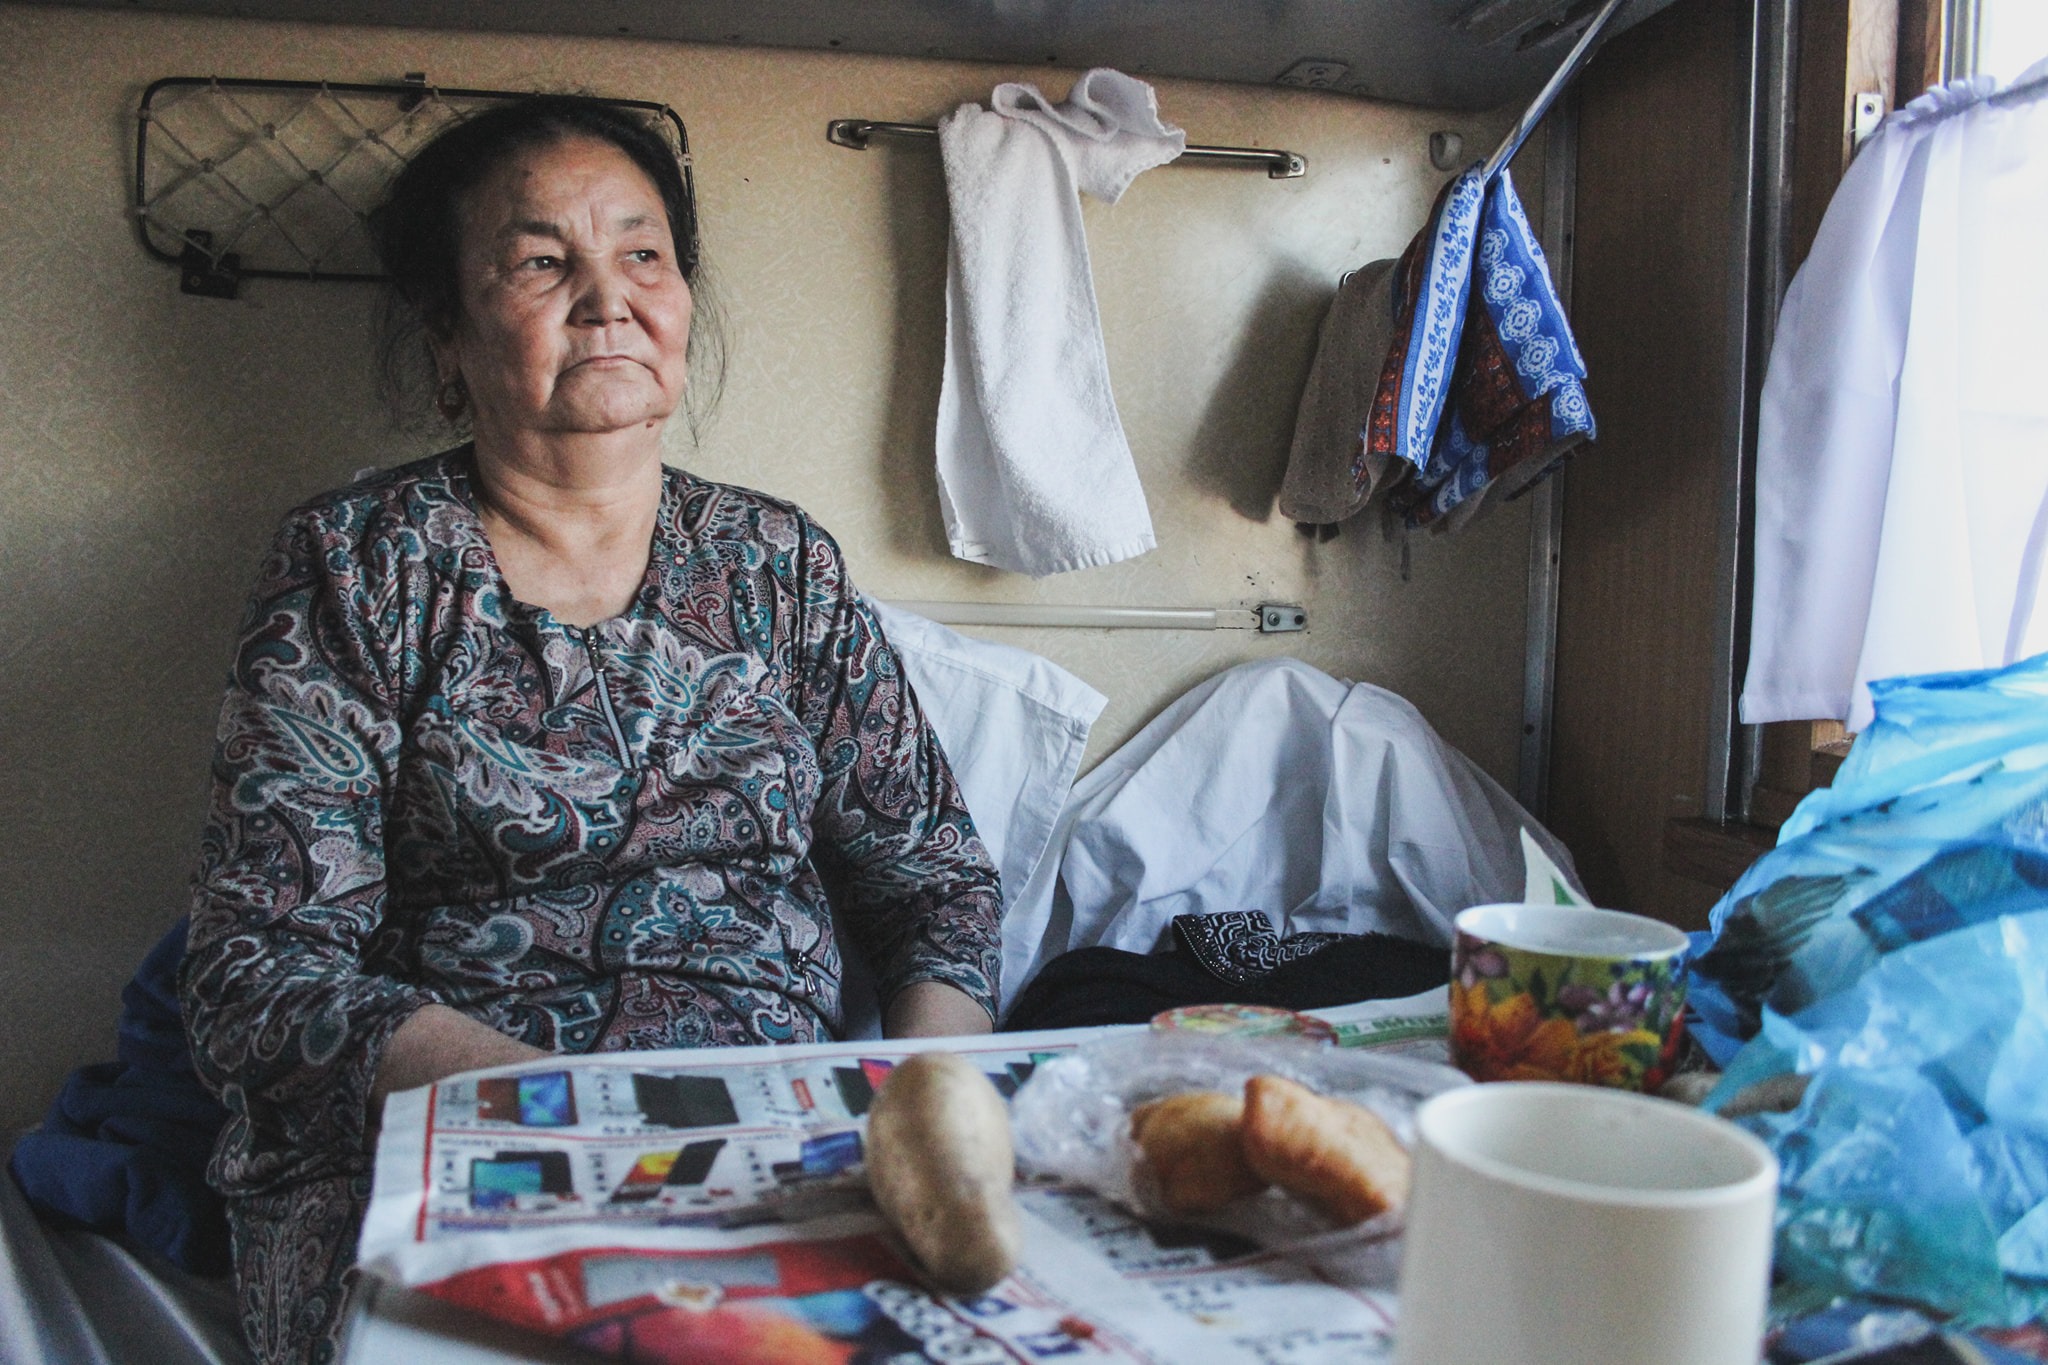 Aiday, a Kazakh woman I met on the train from Kazakhstan to Uzbekistan, who fed me chicken and manty (dumplings) sold at train stops along the way